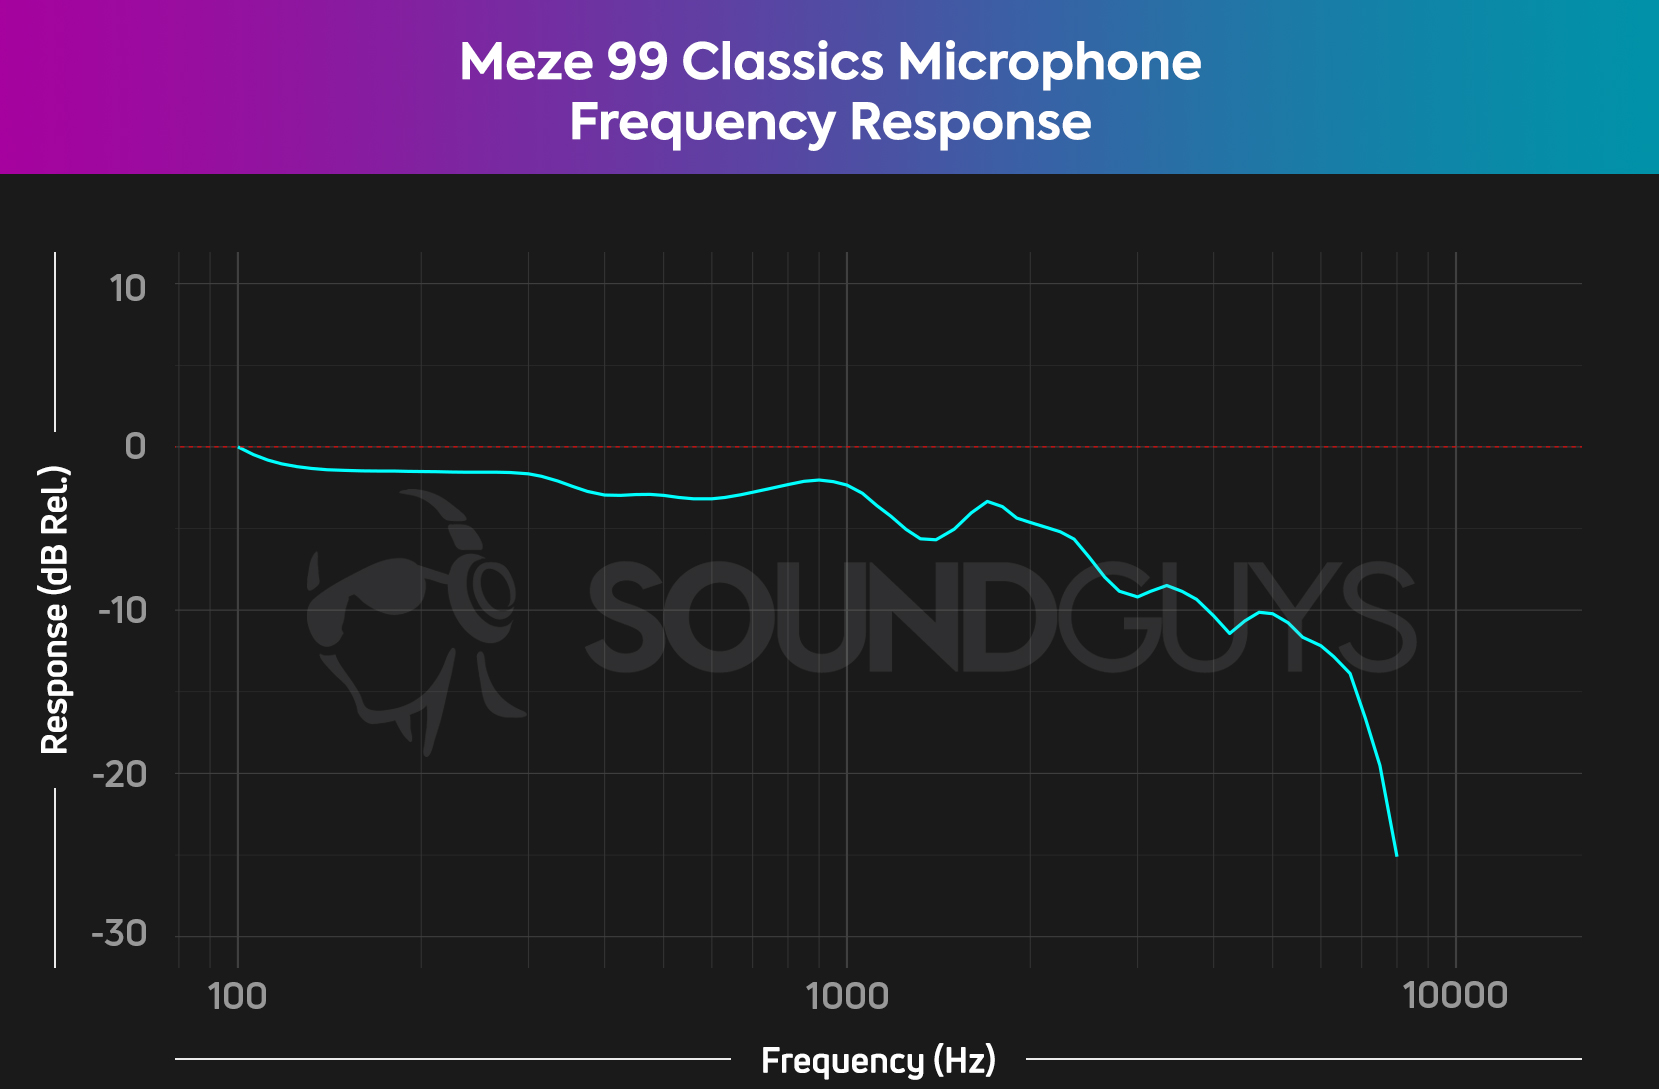 The microphone of the Meze 99 Classics preserves low-end sound while dampening the highest-end of human voices.